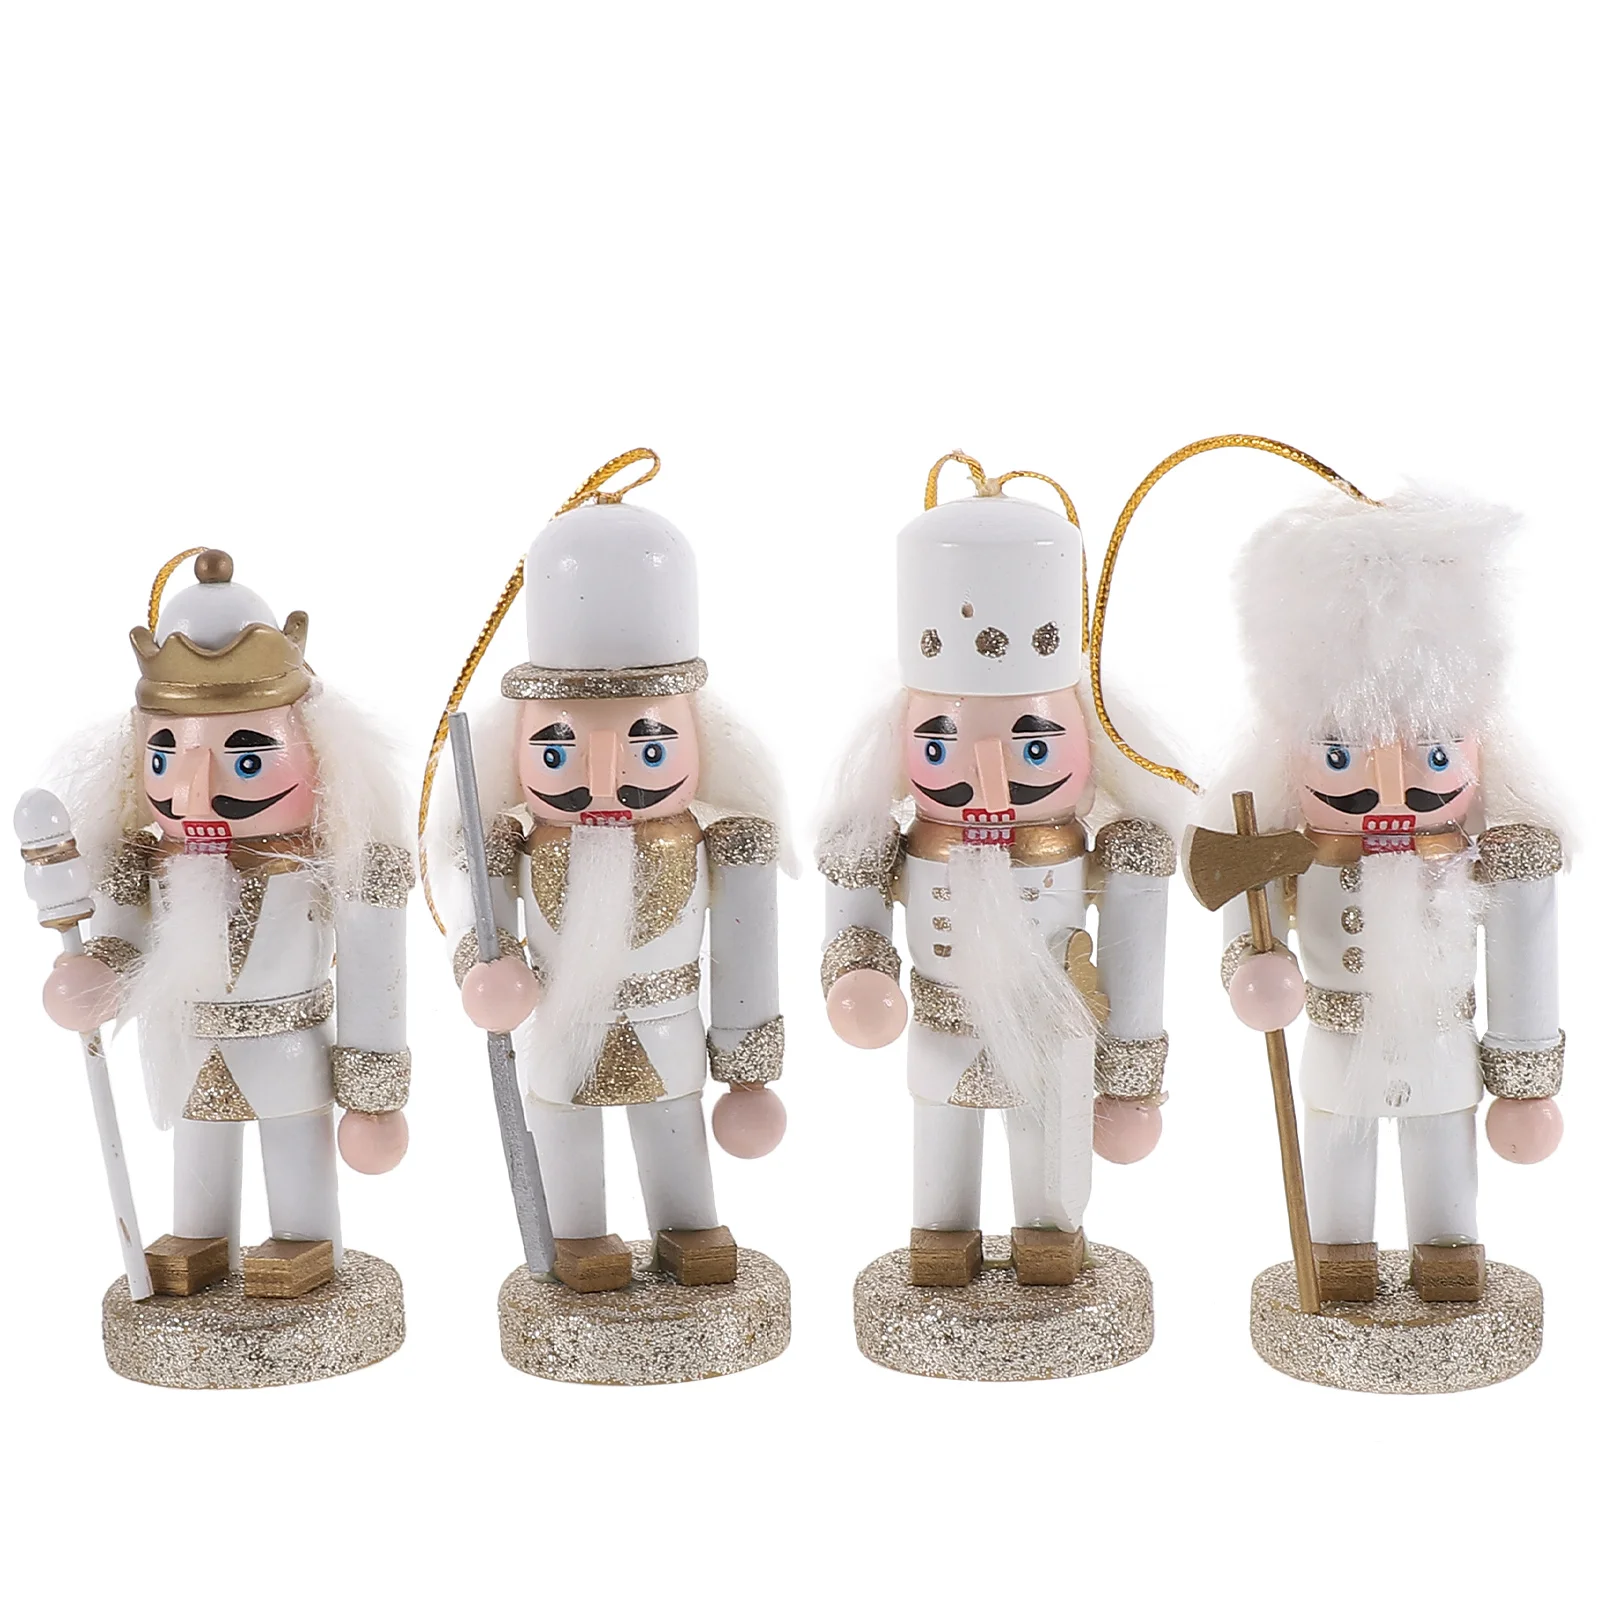 

4 Pcs Gift Indoor Ornament Christmas Decorations Wood Nutcracker Figurine Party Festival Nutcrackers Small Walnut Outdoor